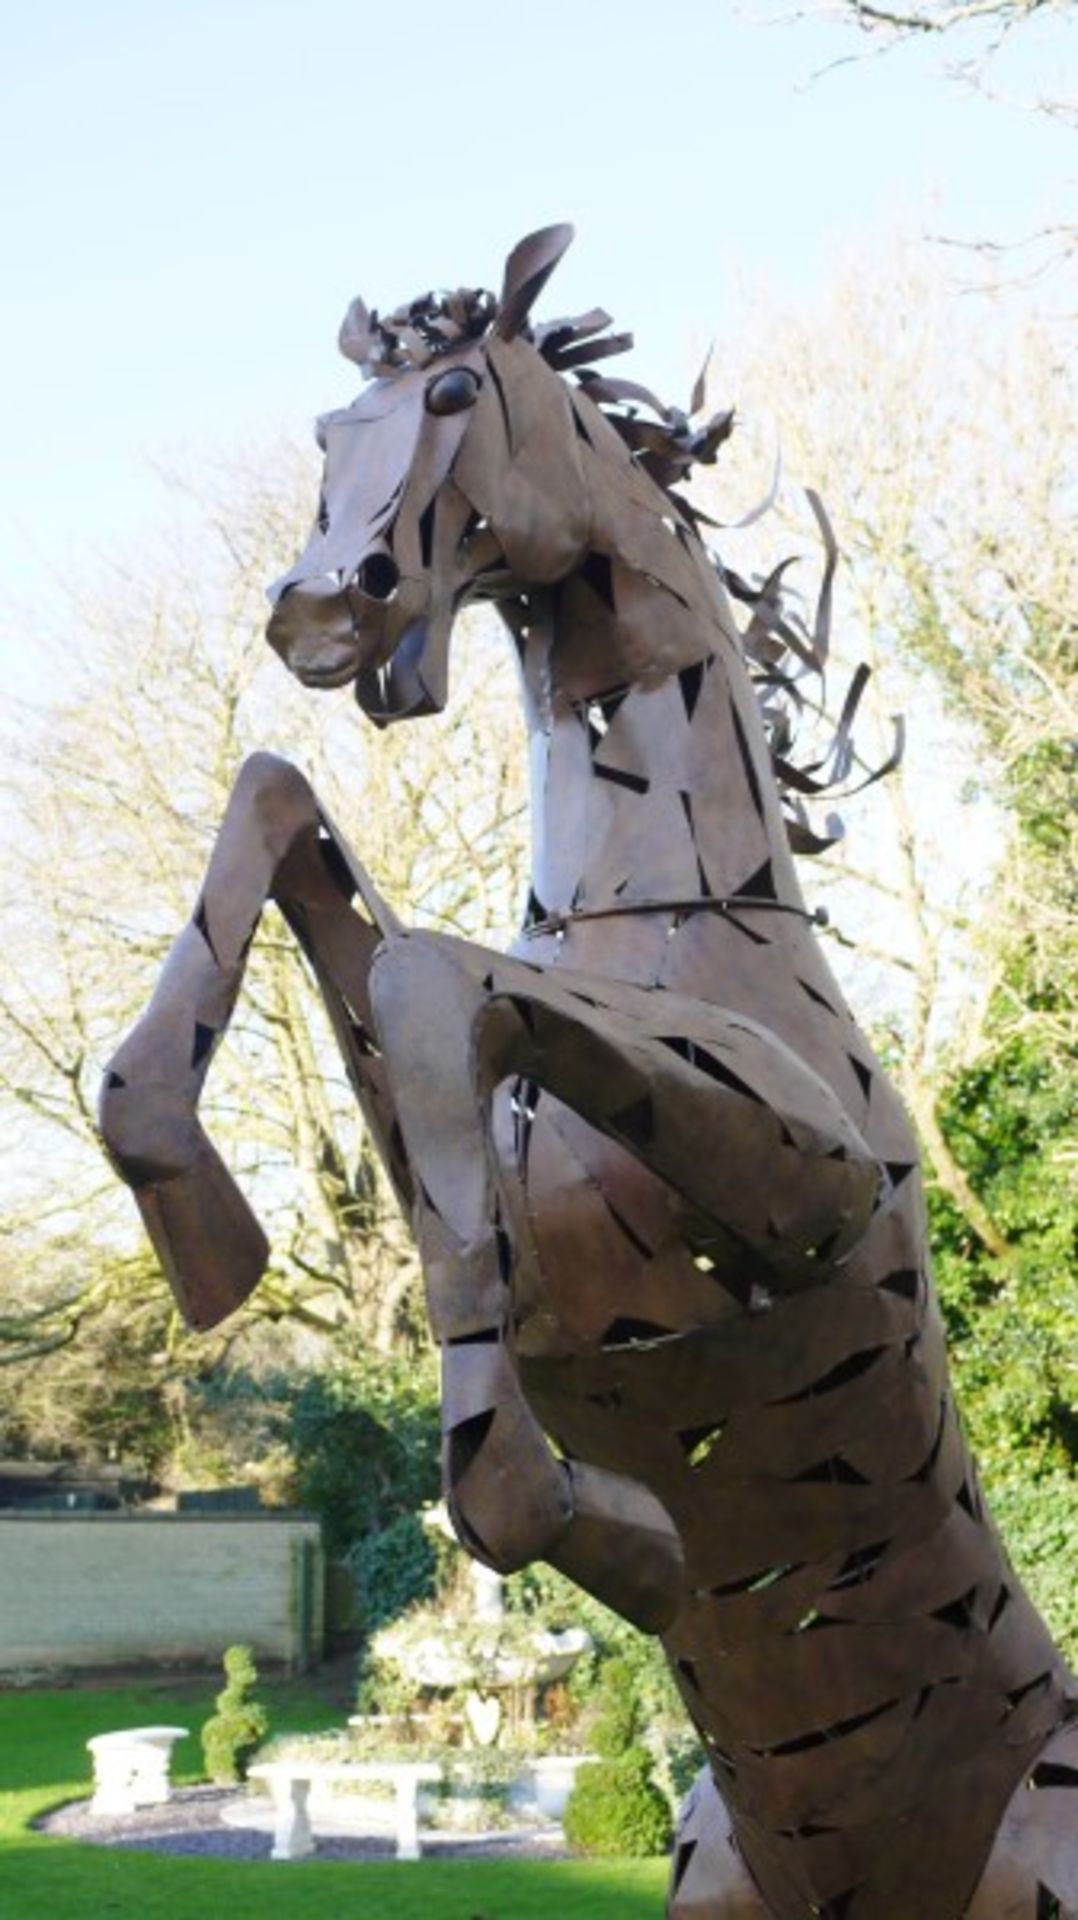 VERY RARE METAL REARING HORSE STATUE- LARGER THAN LIFE - 11 FEET HIGH ! - Image 2 of 6